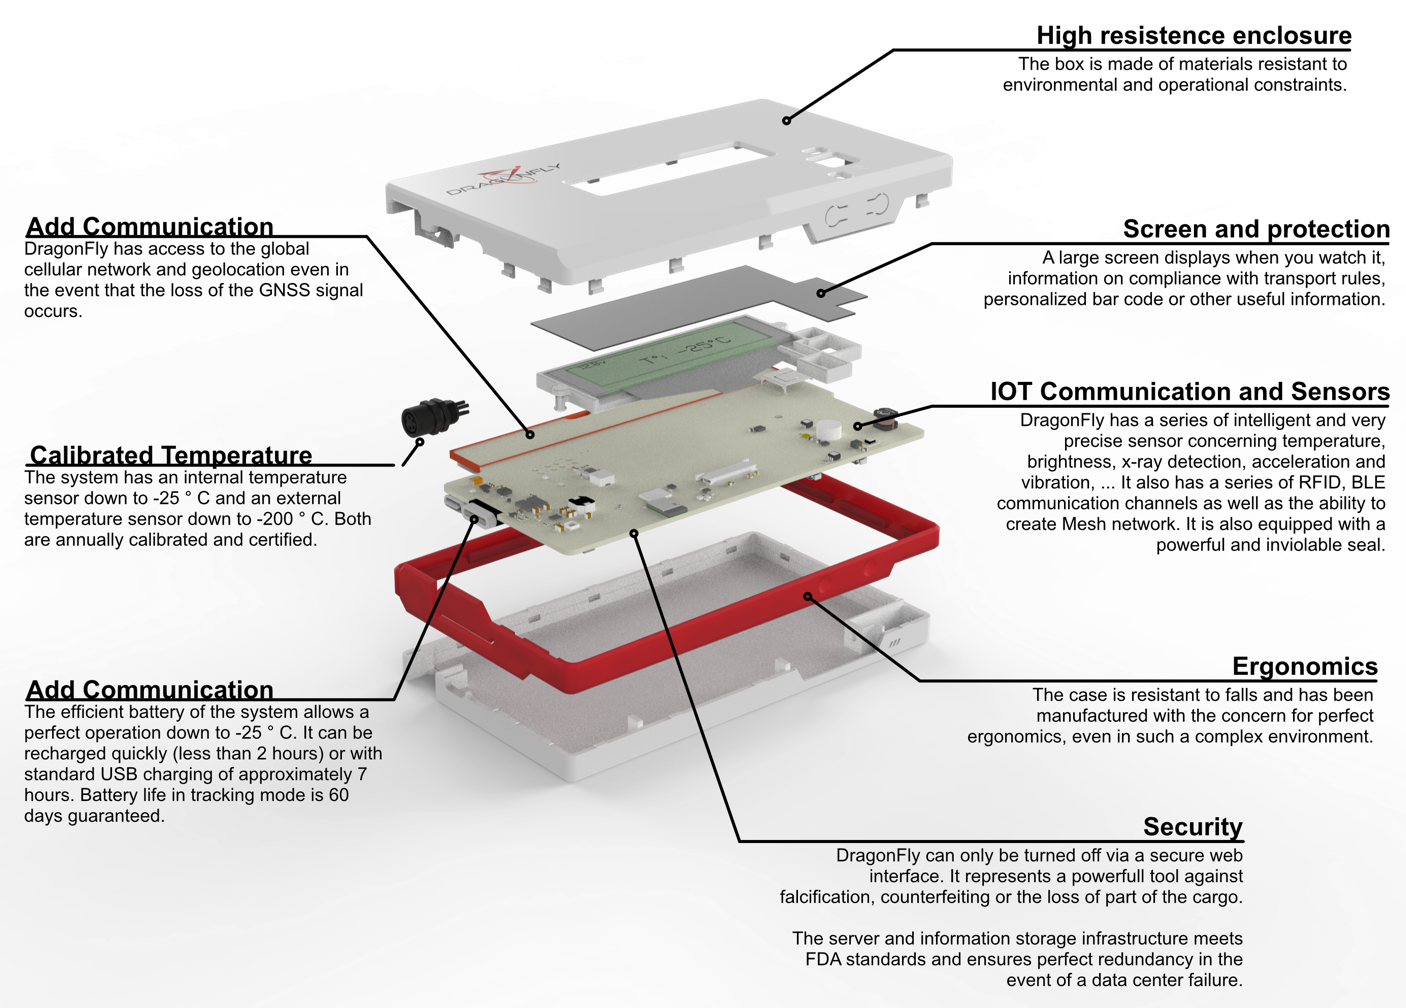 Exploded view of Dragonfly showing the main system components